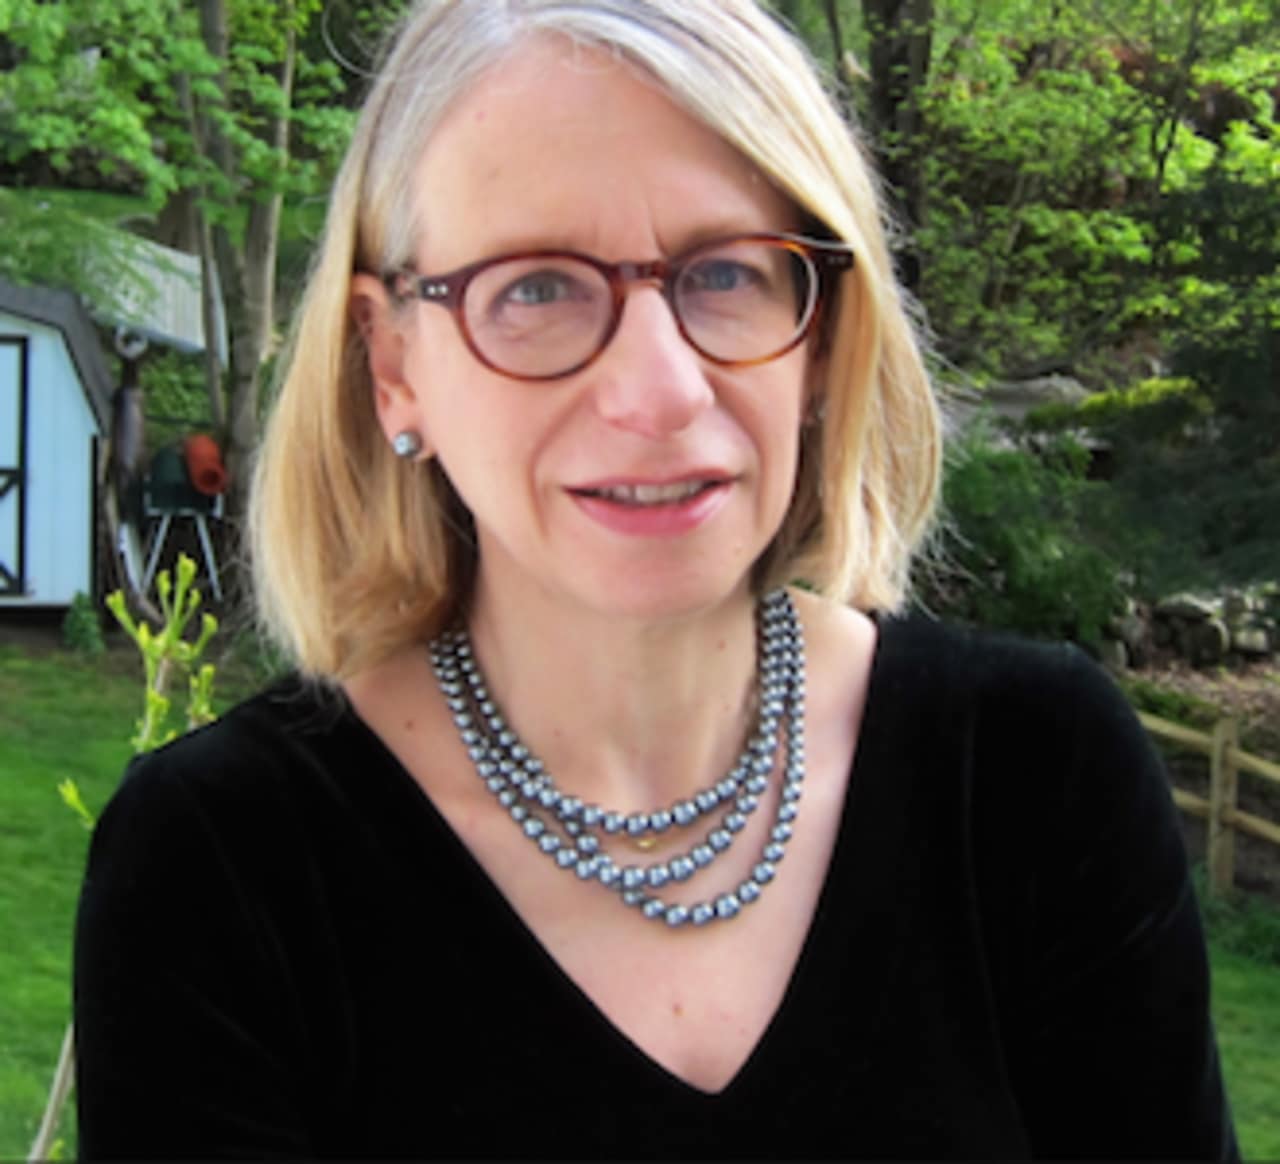 New Yorker cartoonist Roz Chast was honored at the Silvermine Arts Center's inaugural Living Art Awards Benefit May 21.